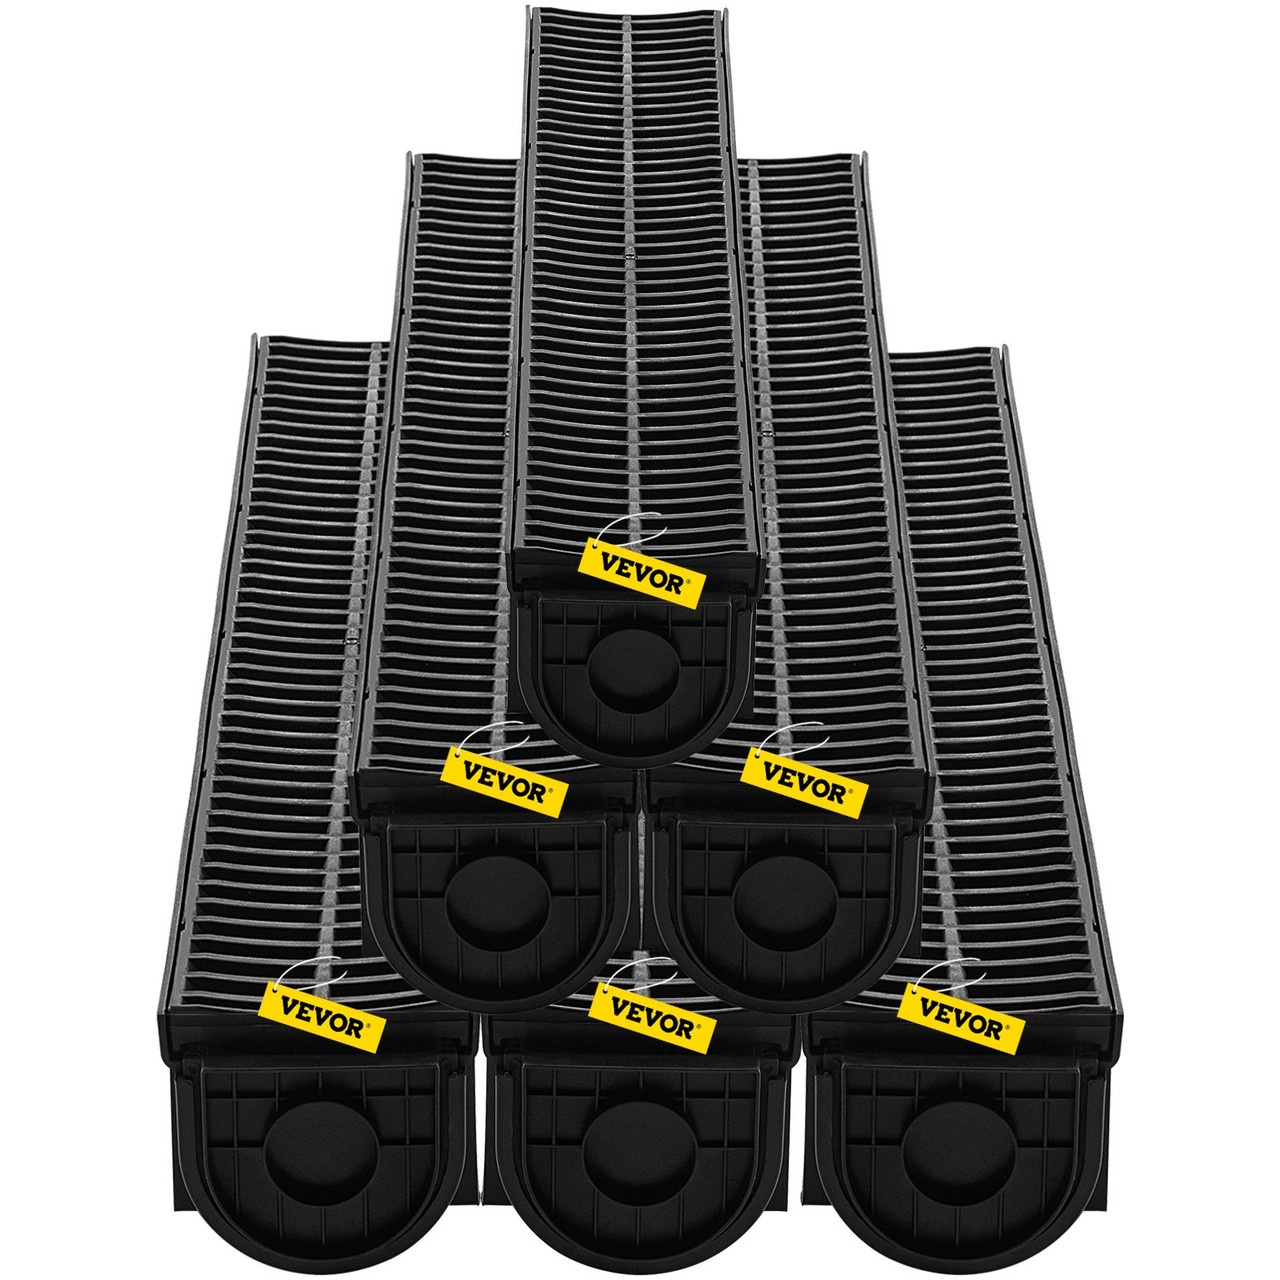 VEVOR Trench Drain System, Channel Drain with Plastic Grate, 5.9x5.1-Inch HDPE Drainage Trench, Black Plastic Garage Floor Drain, 6x39 Trench Drain Grate, with 6 End Caps, for Garden, Driveway-6 Pack